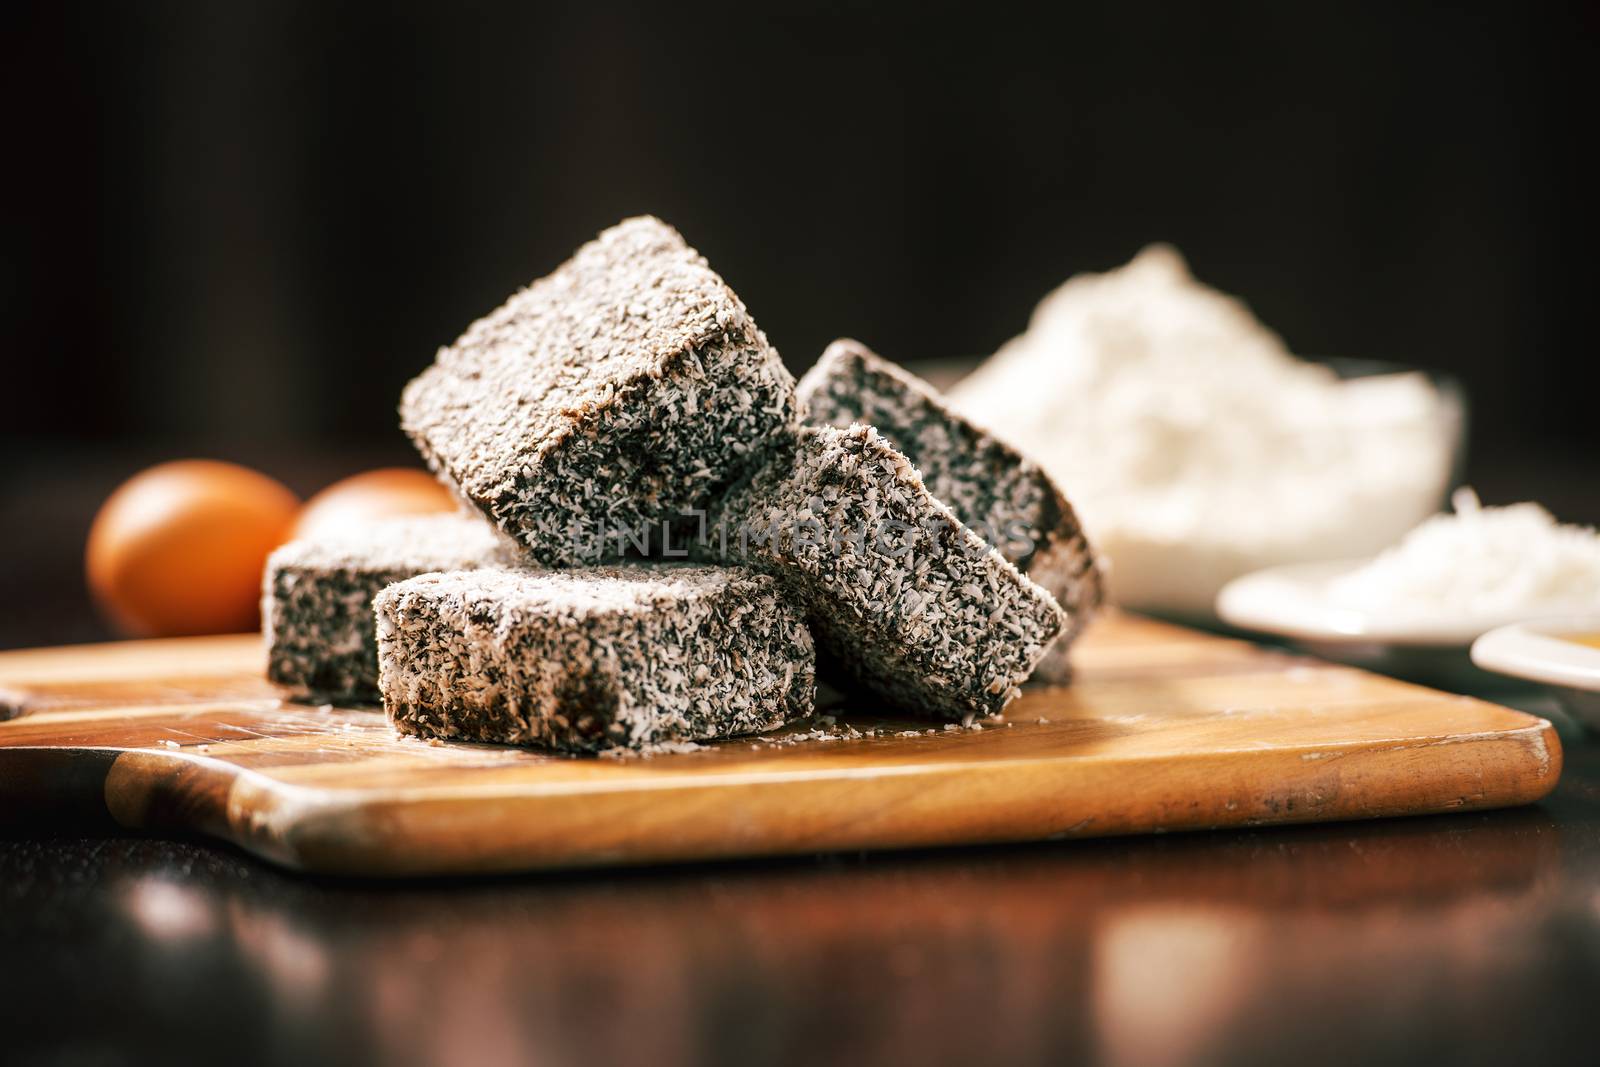 Group of Lamingtons on a timber cutting board with food ingredients in the background